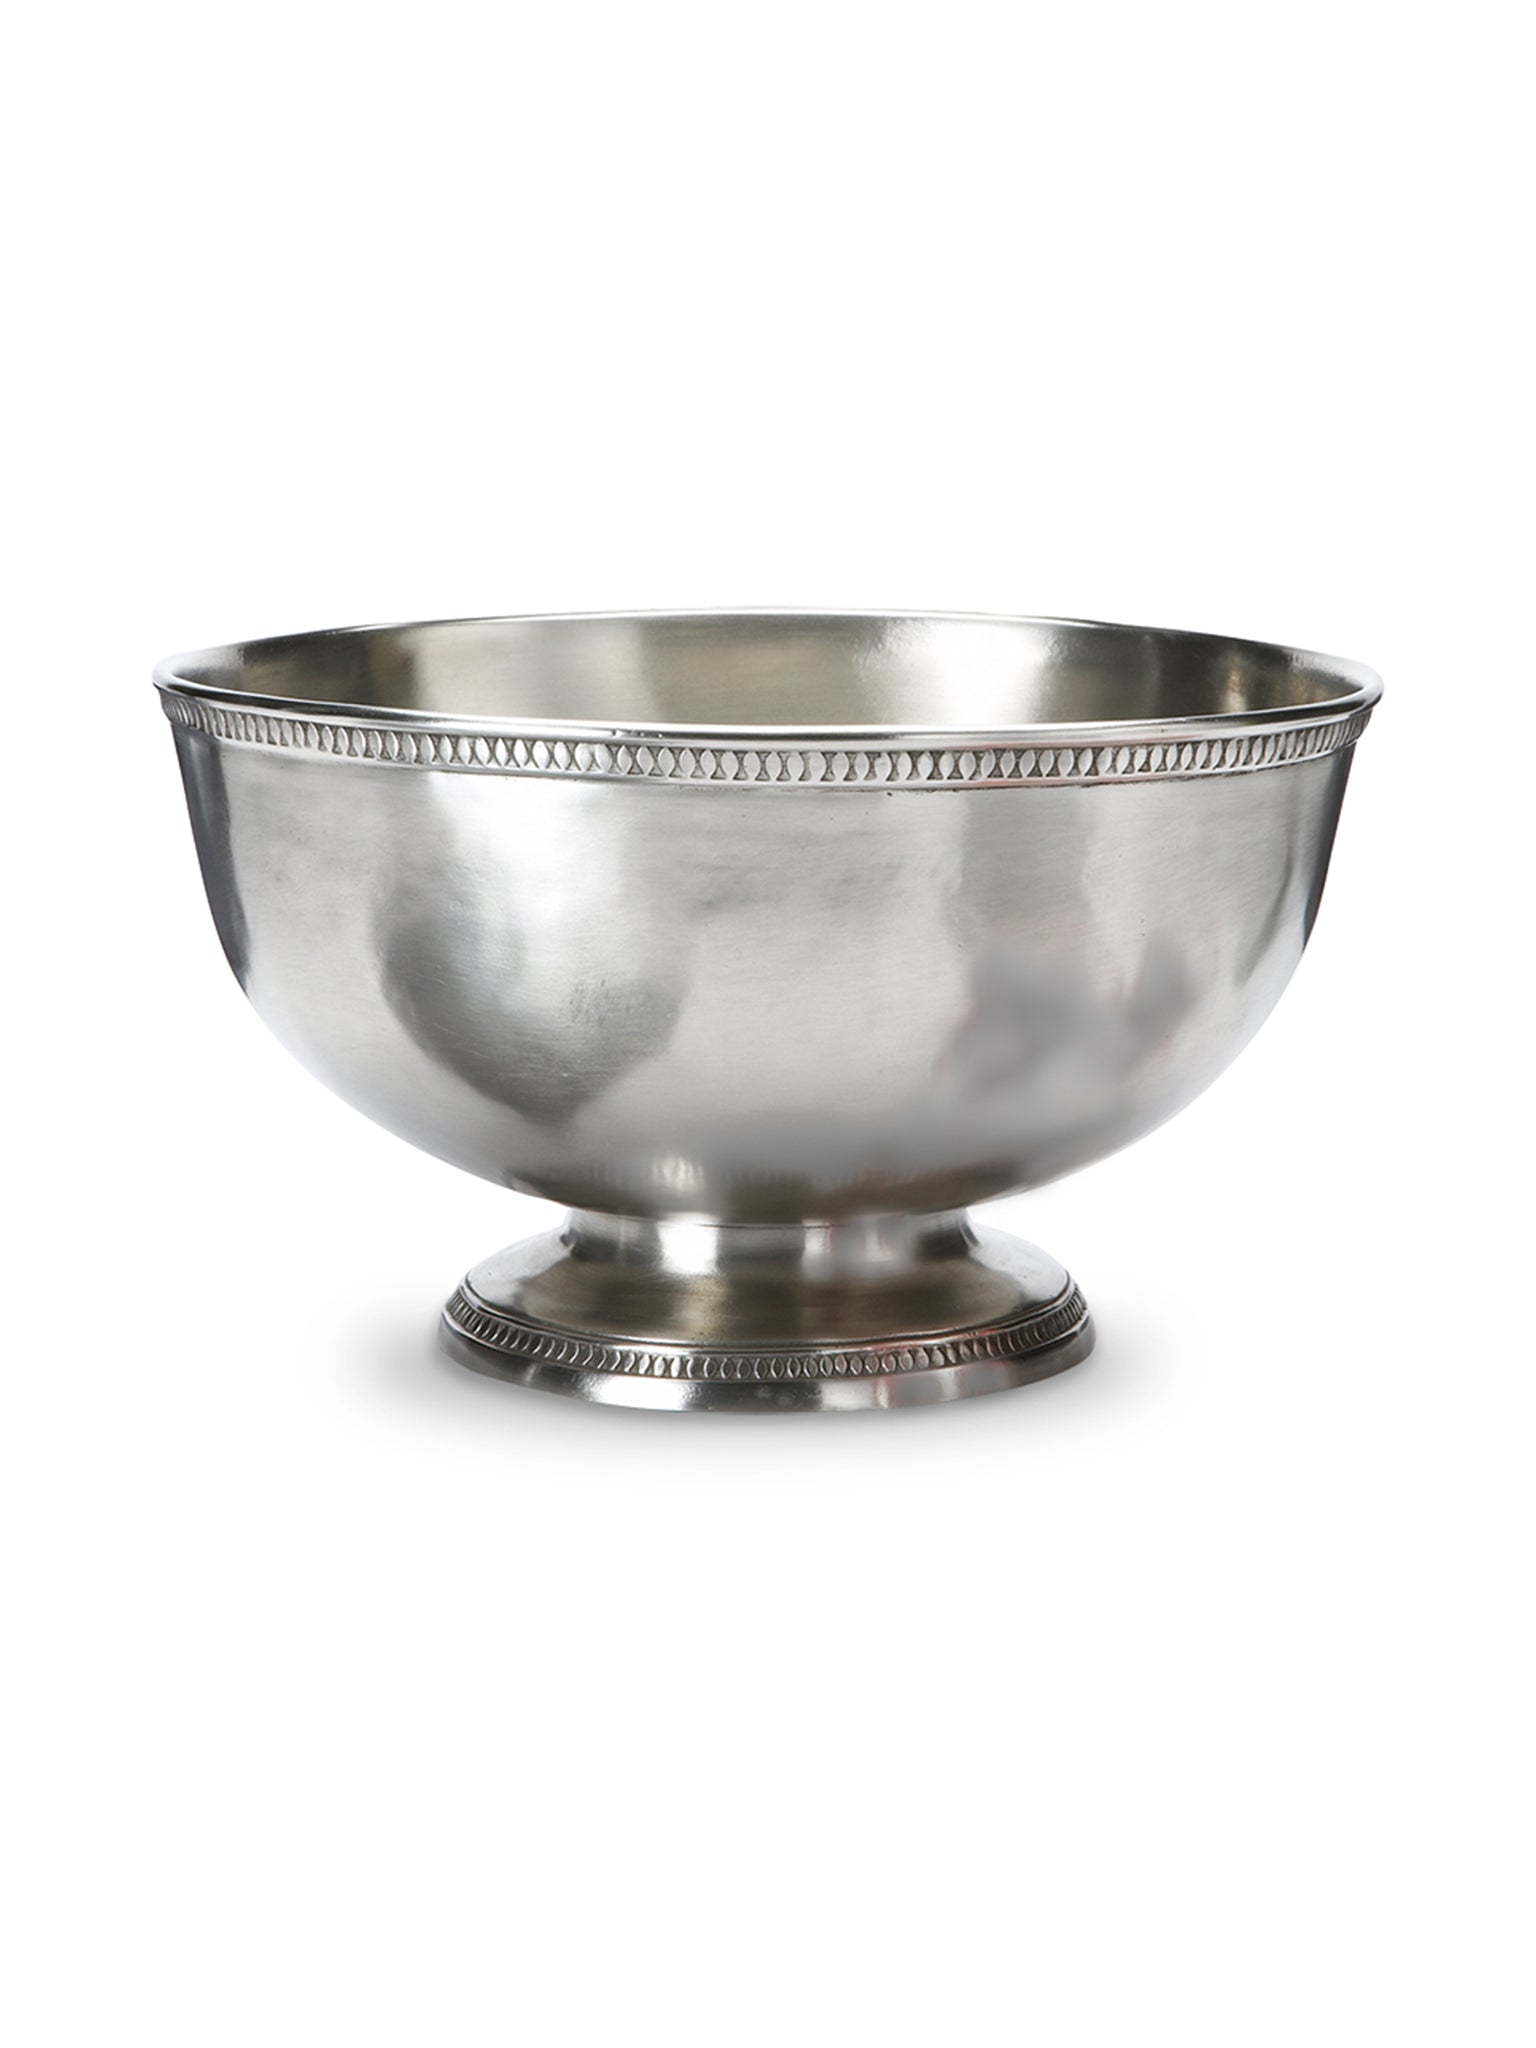 MATCH Pewter Punch Bowl Weston Table